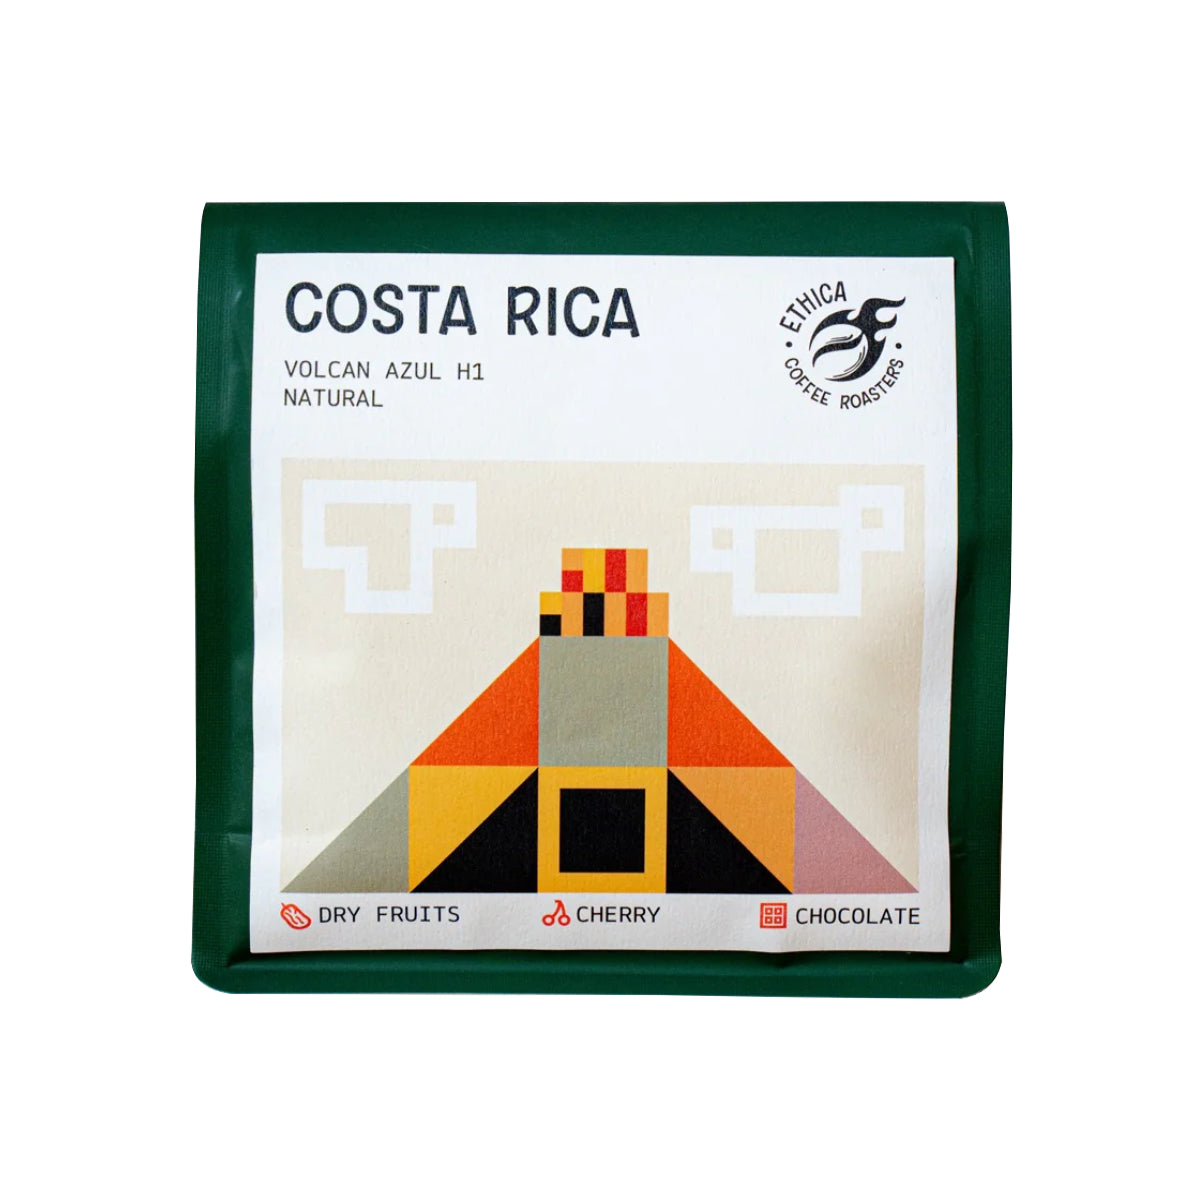 Ethica Costa Rica Volcan Azul Natural Washed Filter Whole Bean Coffee (250g)